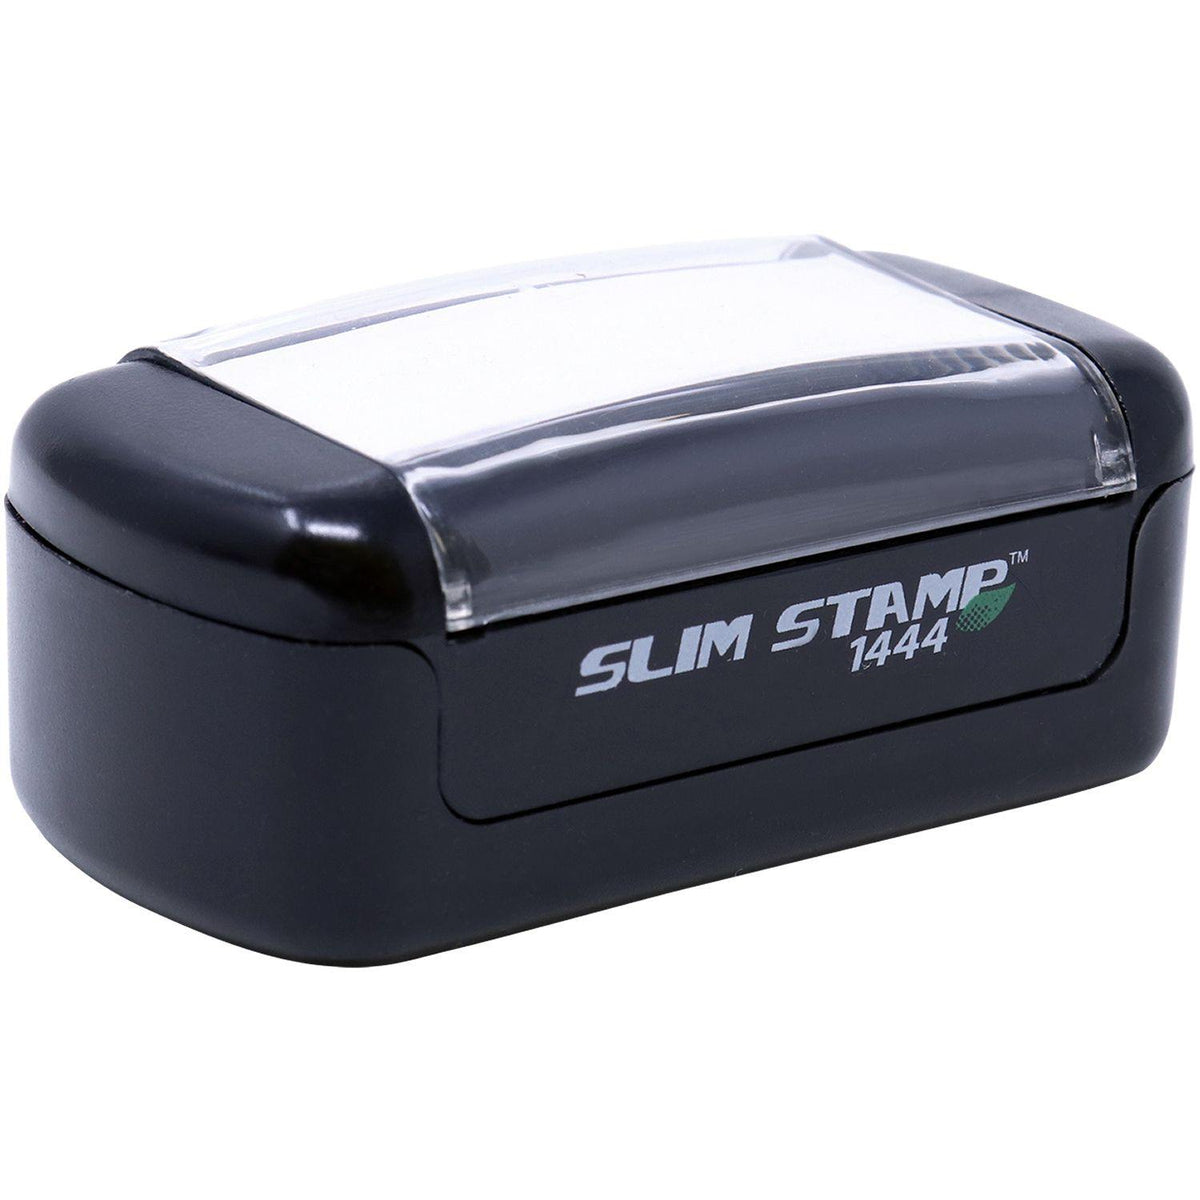 Alt View of Slim Pre-Inked Printed Matter Stamp Mount Angle